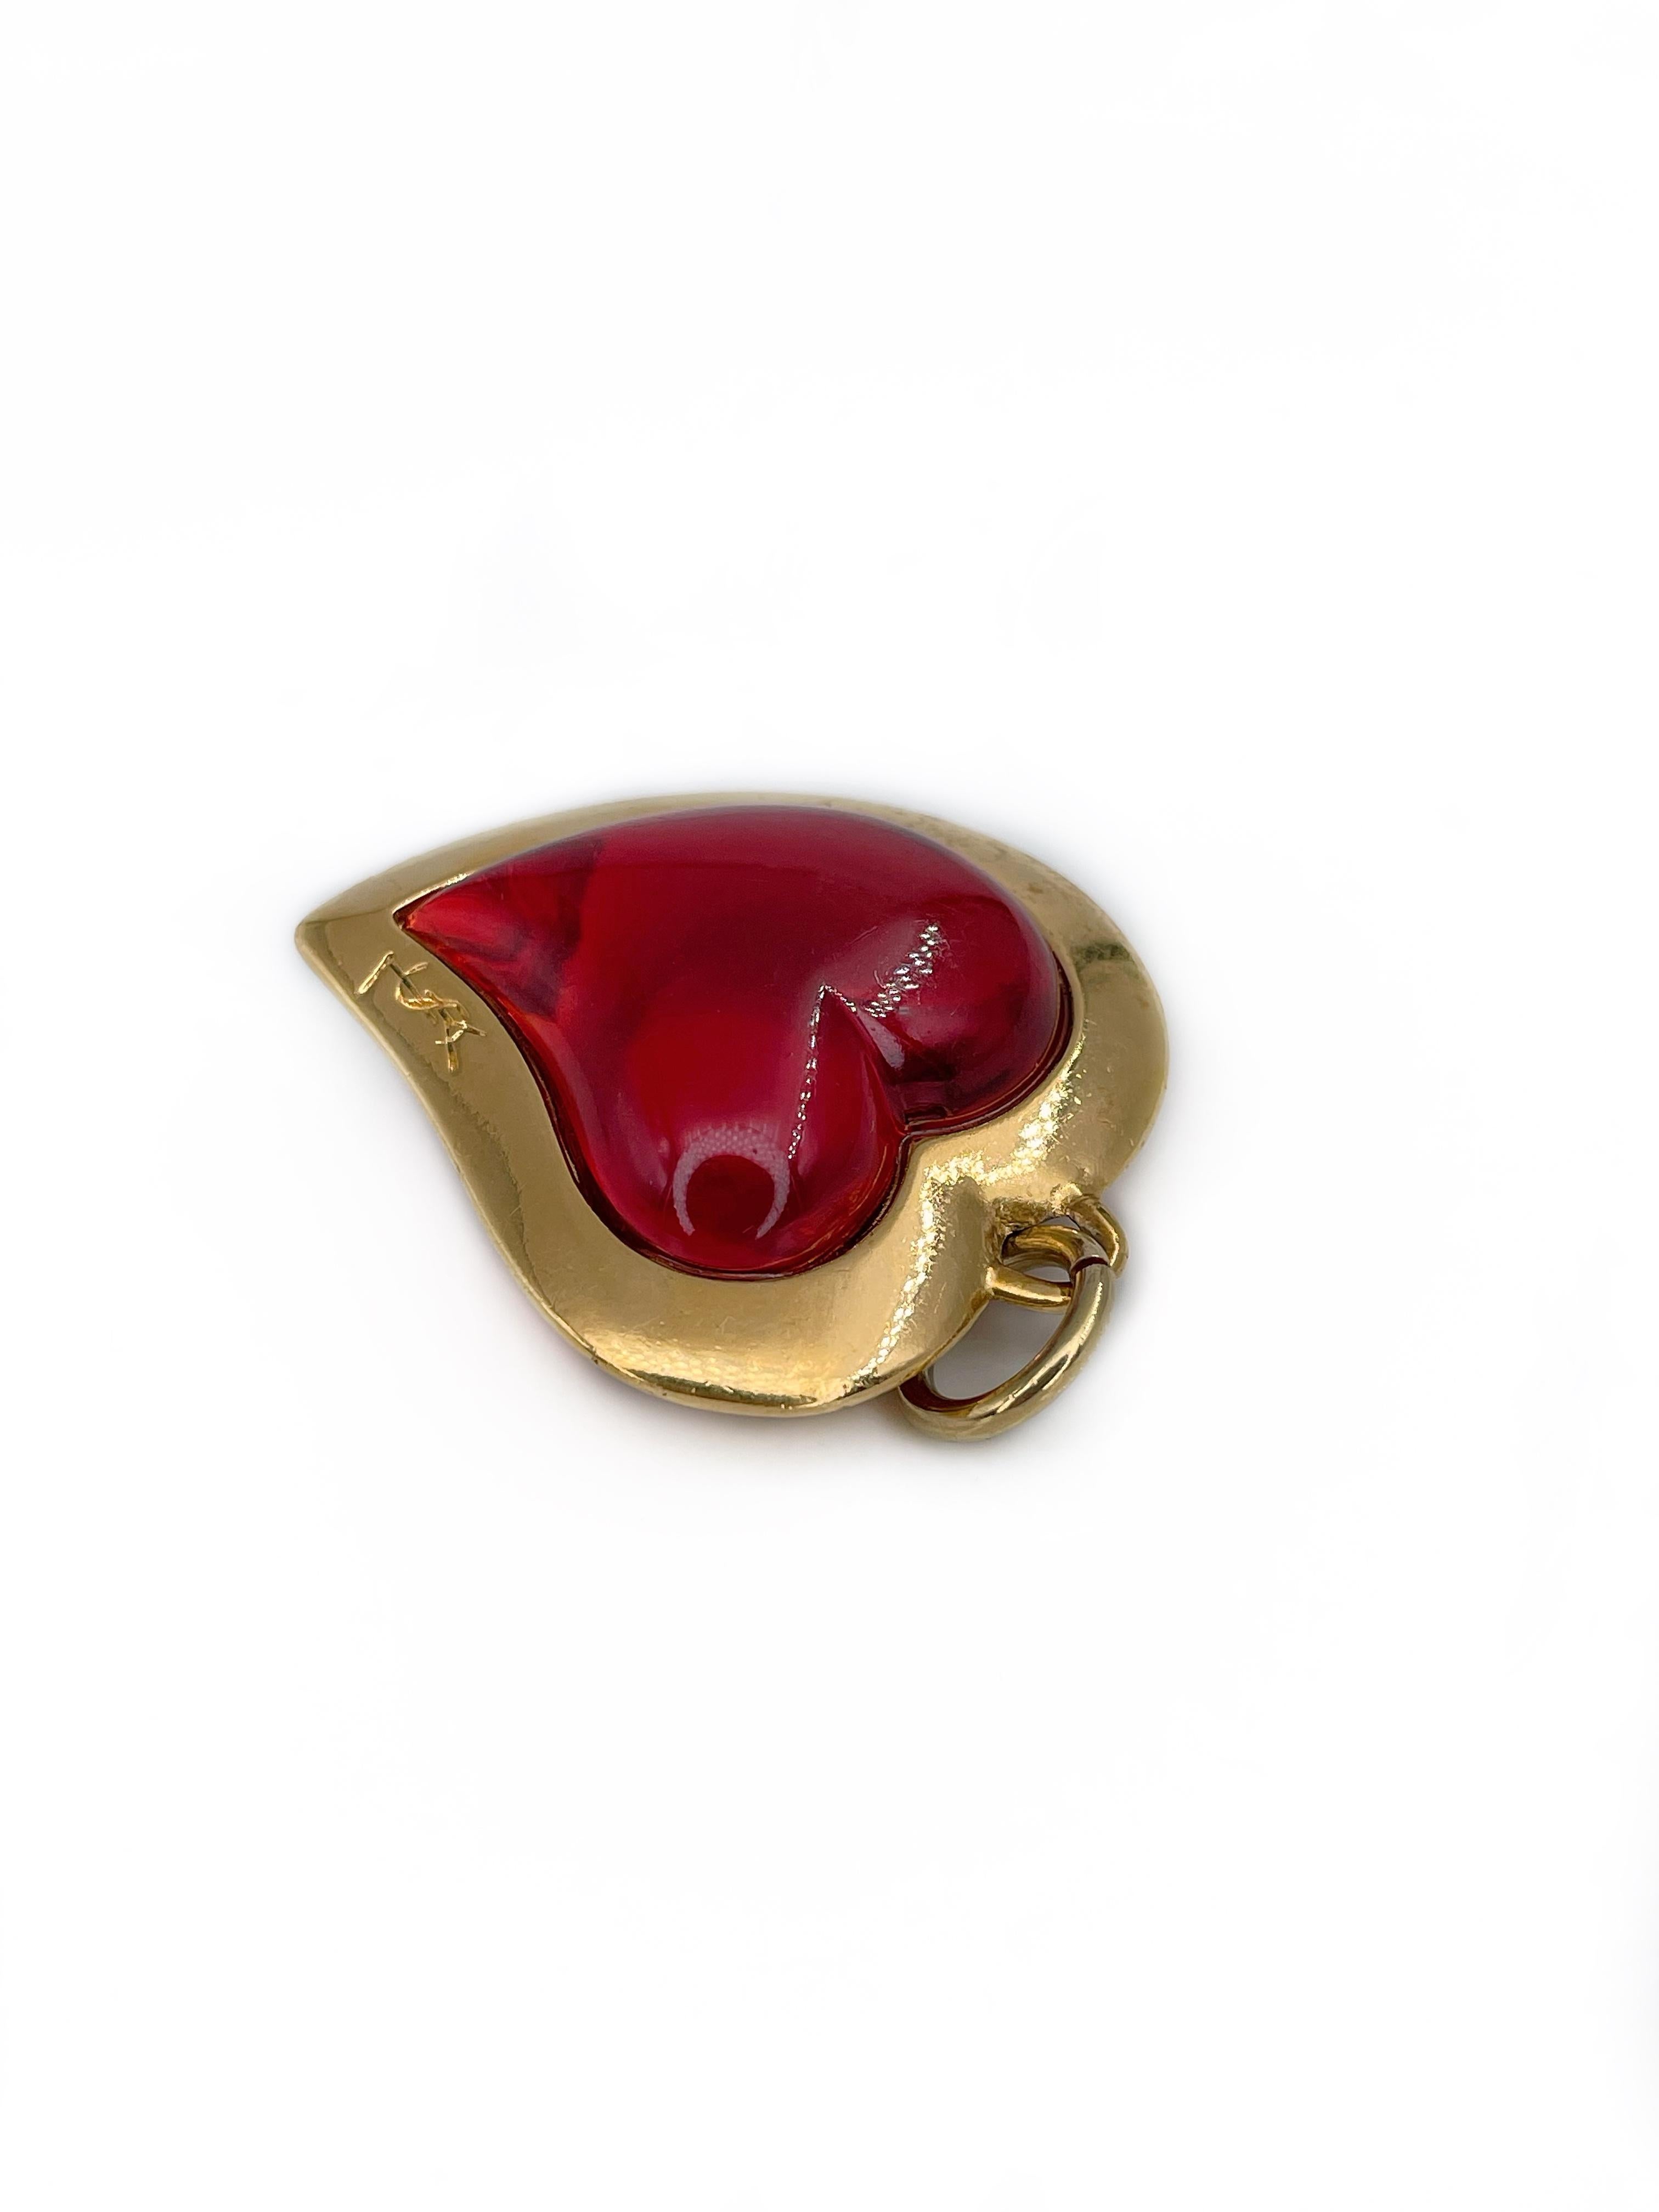 This is a gold tone red heart pendant designed by YSL in 1980’s. The piece is gold plated. It features red translucent glass. 

Signed: “YSL” (shown in photos).

Size: 5x4cm

———

If you have any questions, please feel free to ask. We describe our